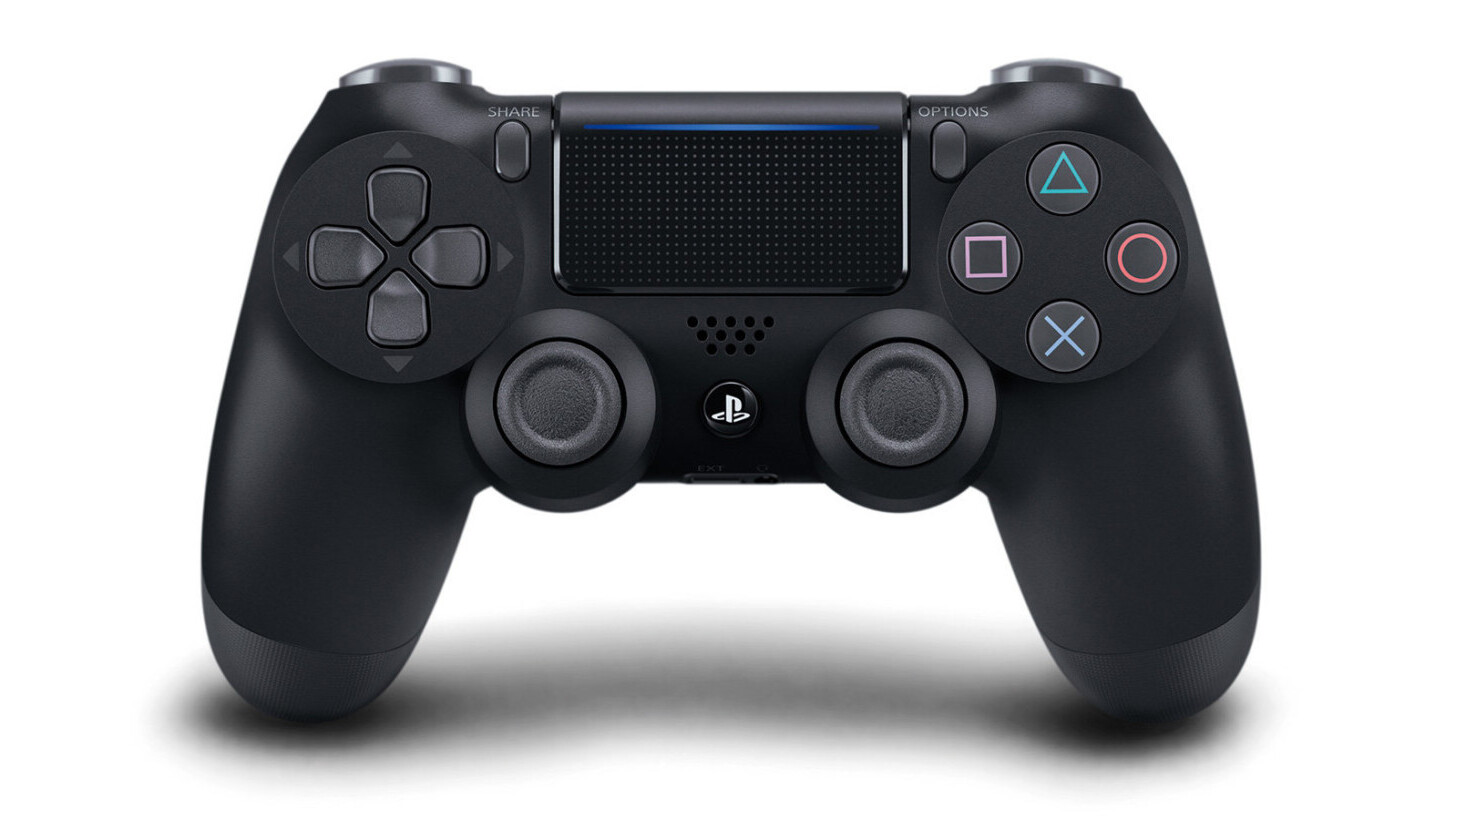 The PS4 controller will work with PS5, but not PS5 games